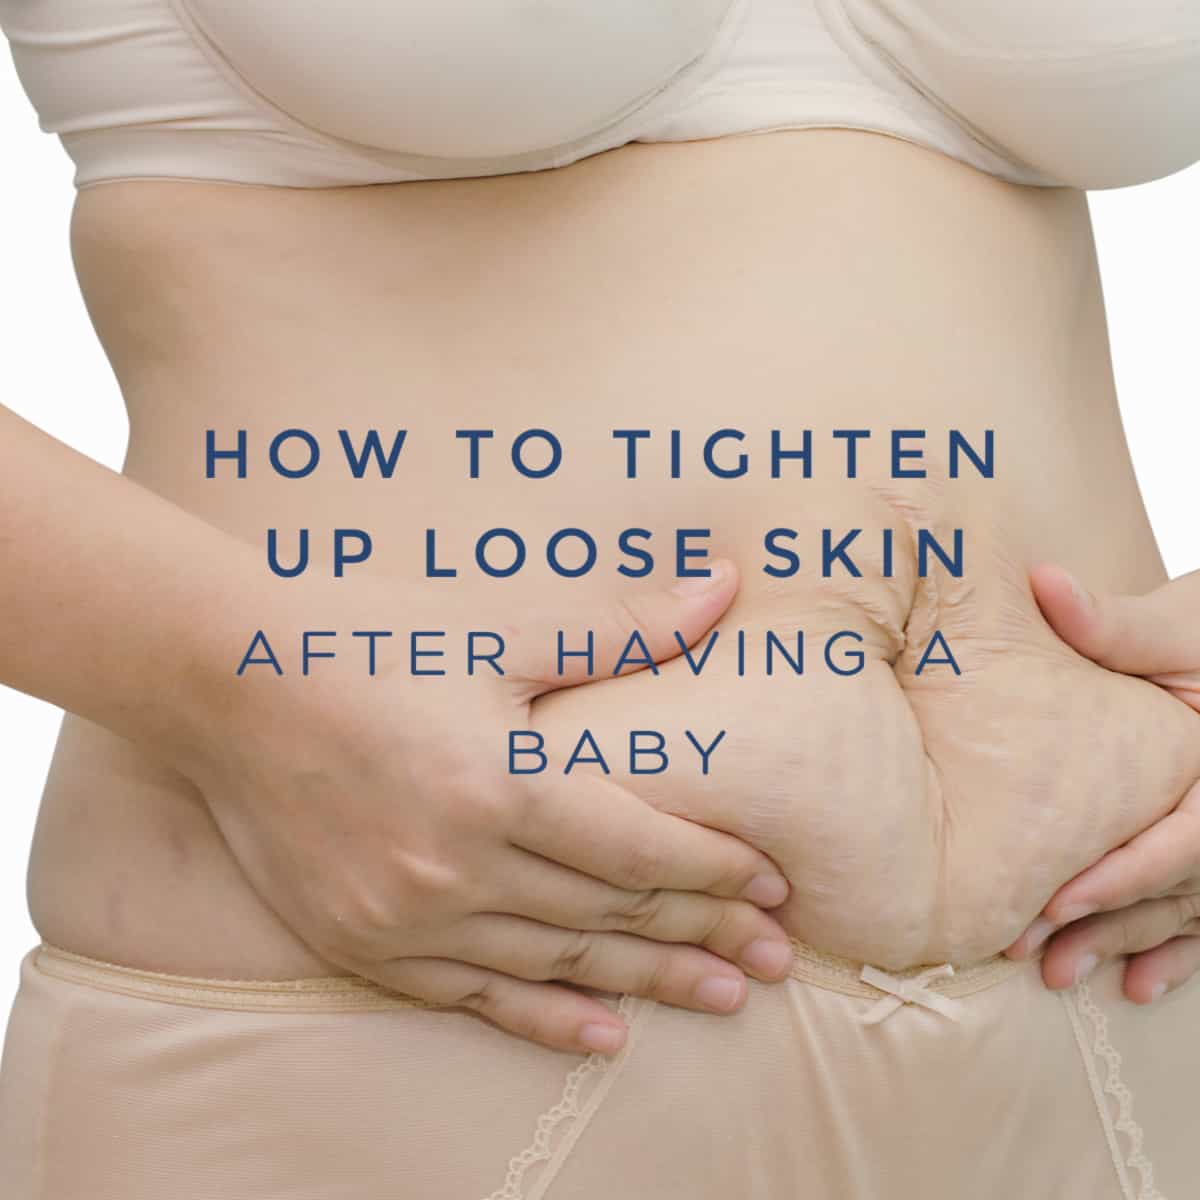 How to Tighten Loose Skin After Pregnancy